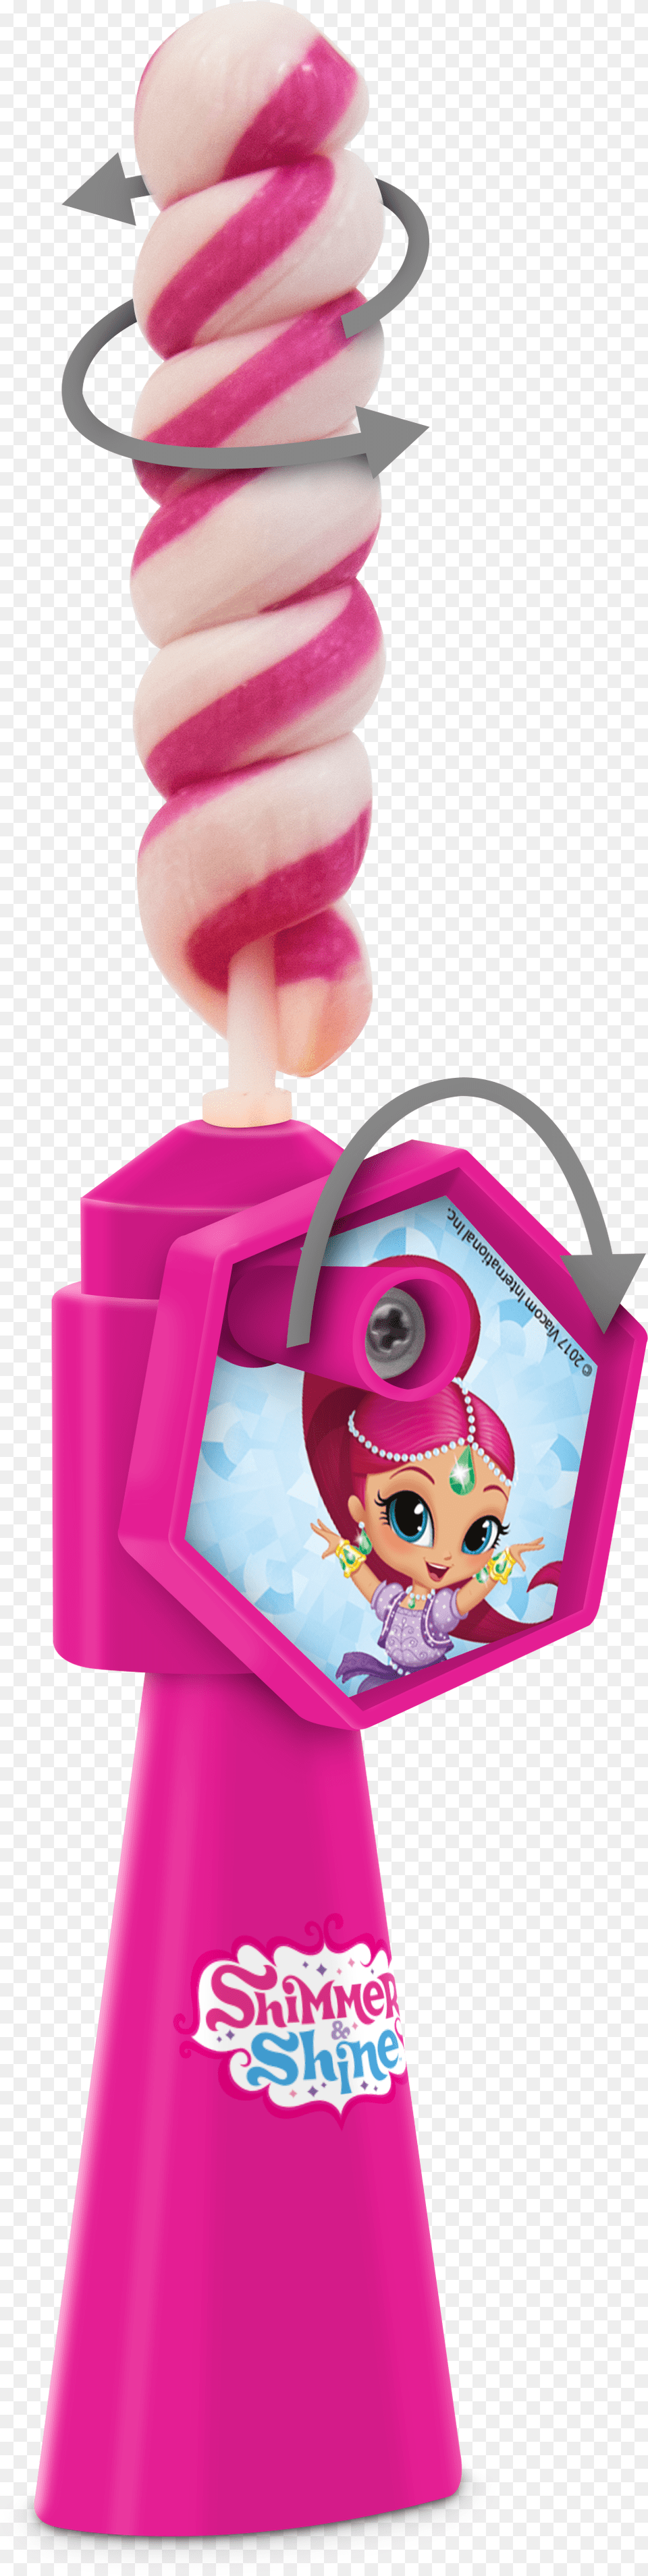 Shimmer And Shine Twist Pop Render Piece Cartoon, Food, Sweets, Candy, Baby Free Png